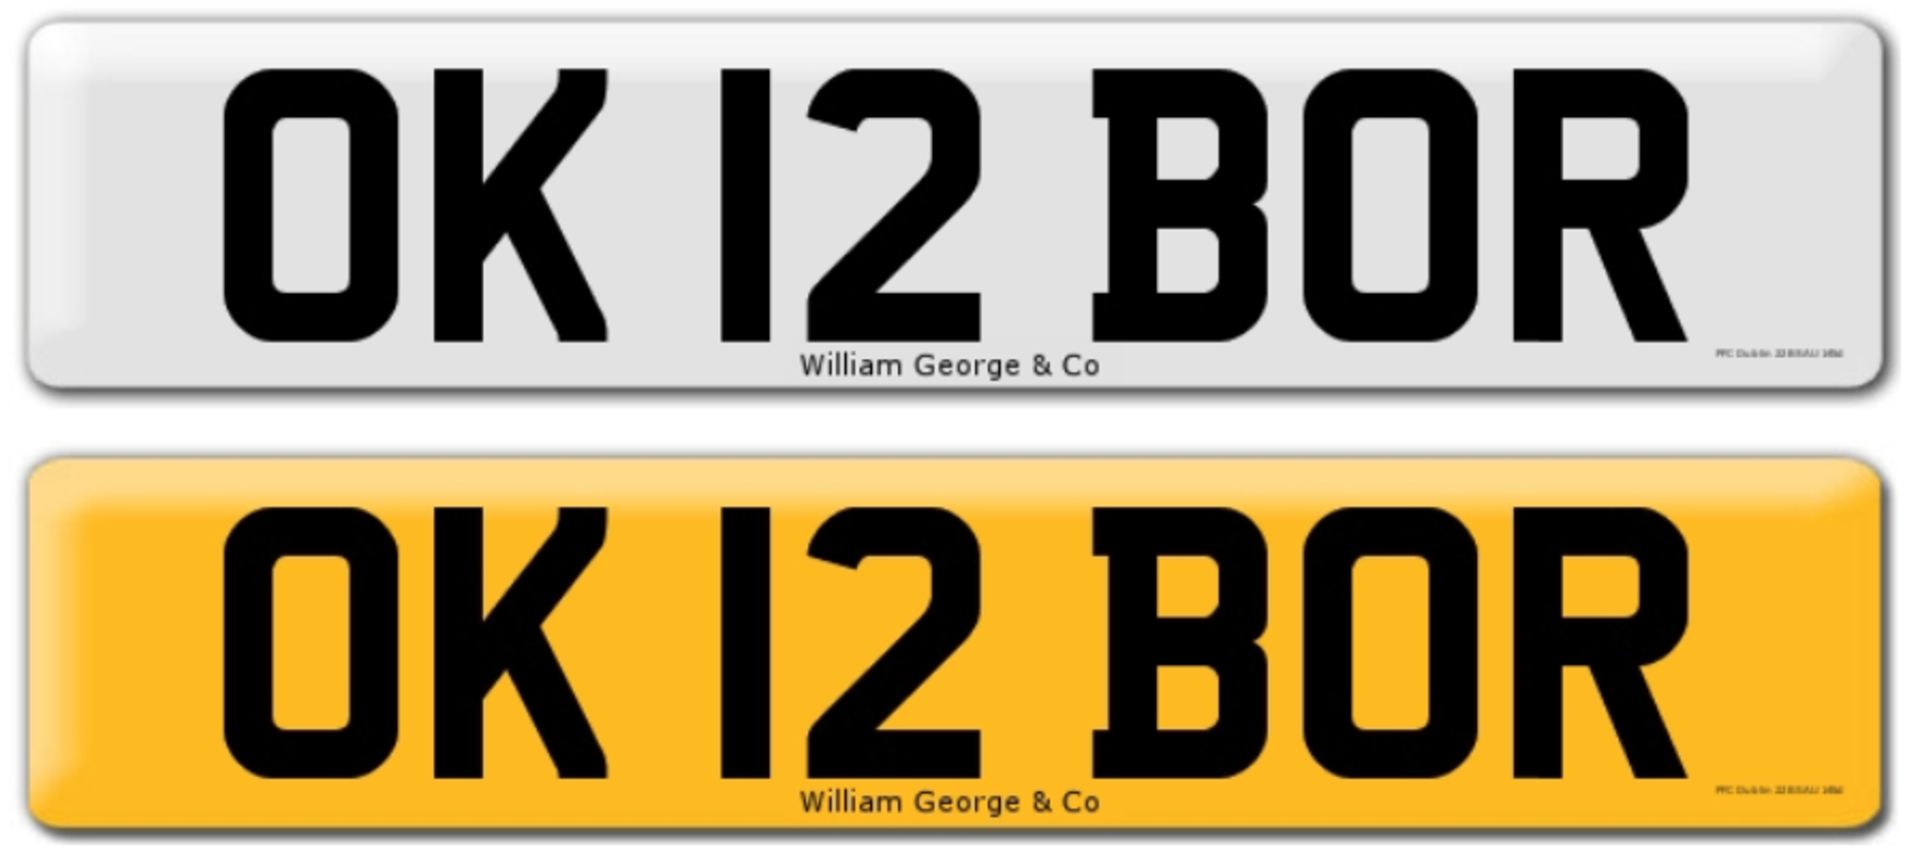 Registration on DVLA retention certificate, ready to transfer OK 12 BOR, This number plate /